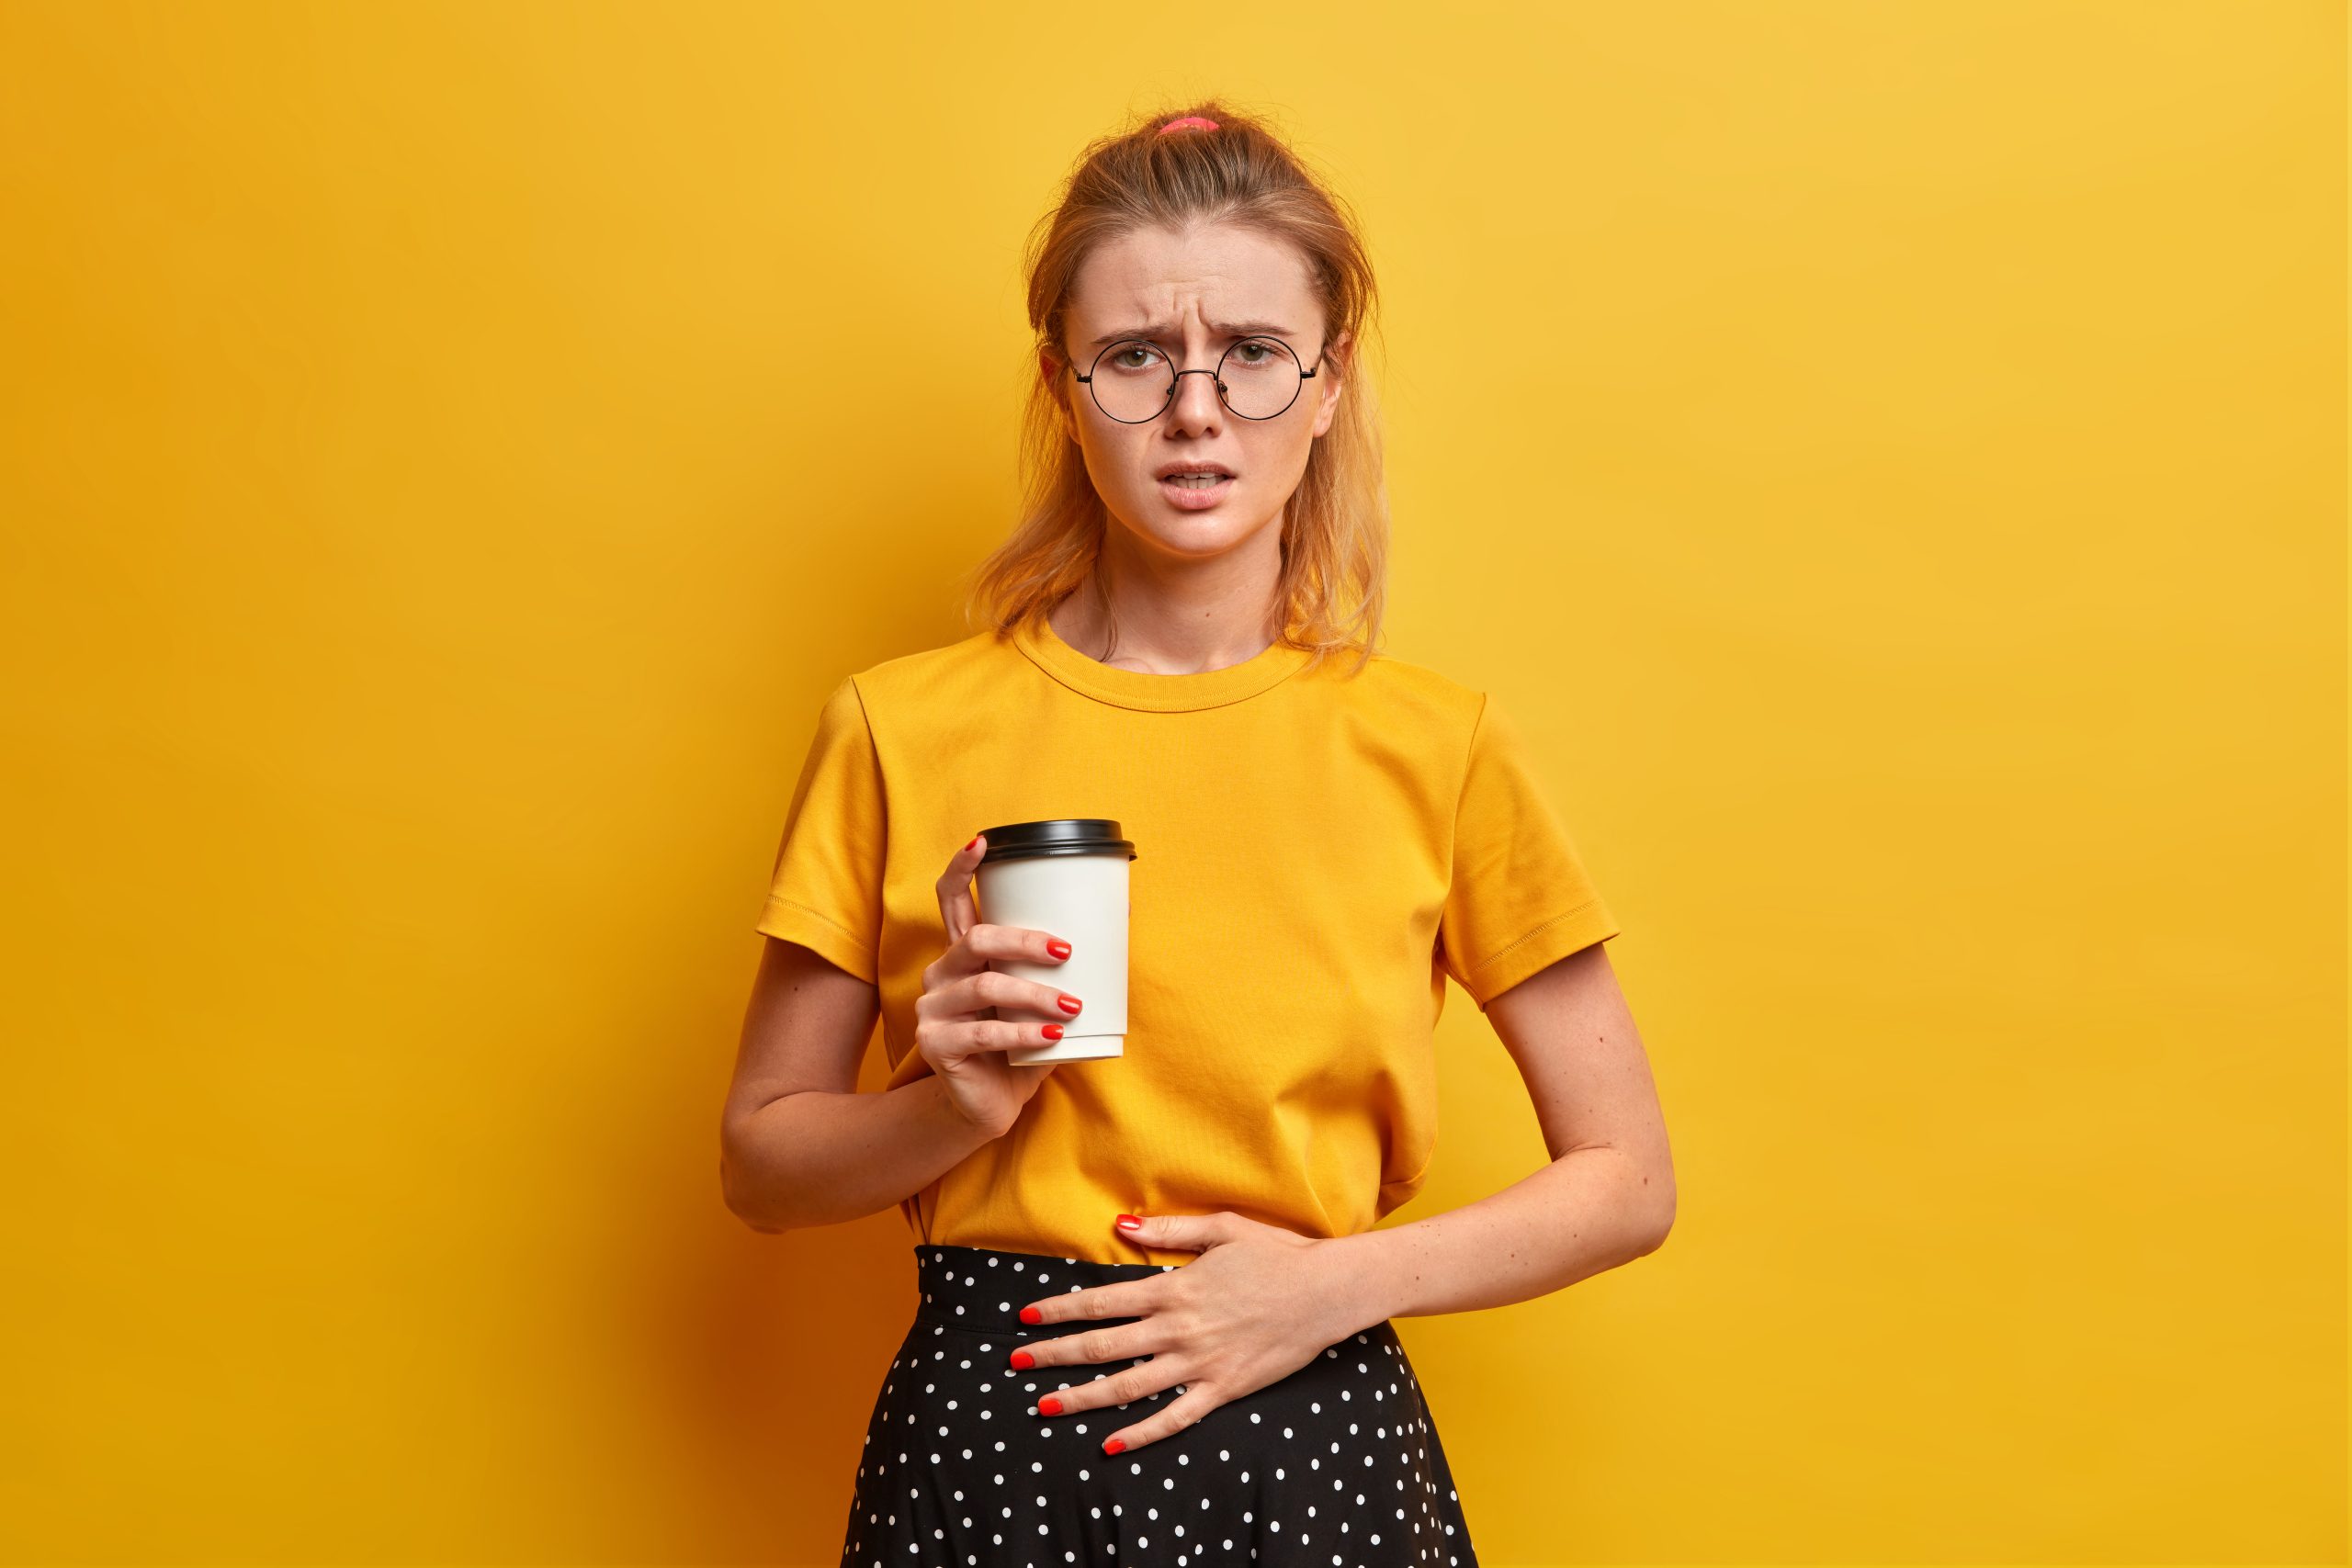 Unhappy displeased female frowns face, feels unwell, keeps hand on belly, drinks takeaway coffee, ate spoiled food, wears transparent glasses, casual yellow t shirt, stands indoor. Abdominal pain